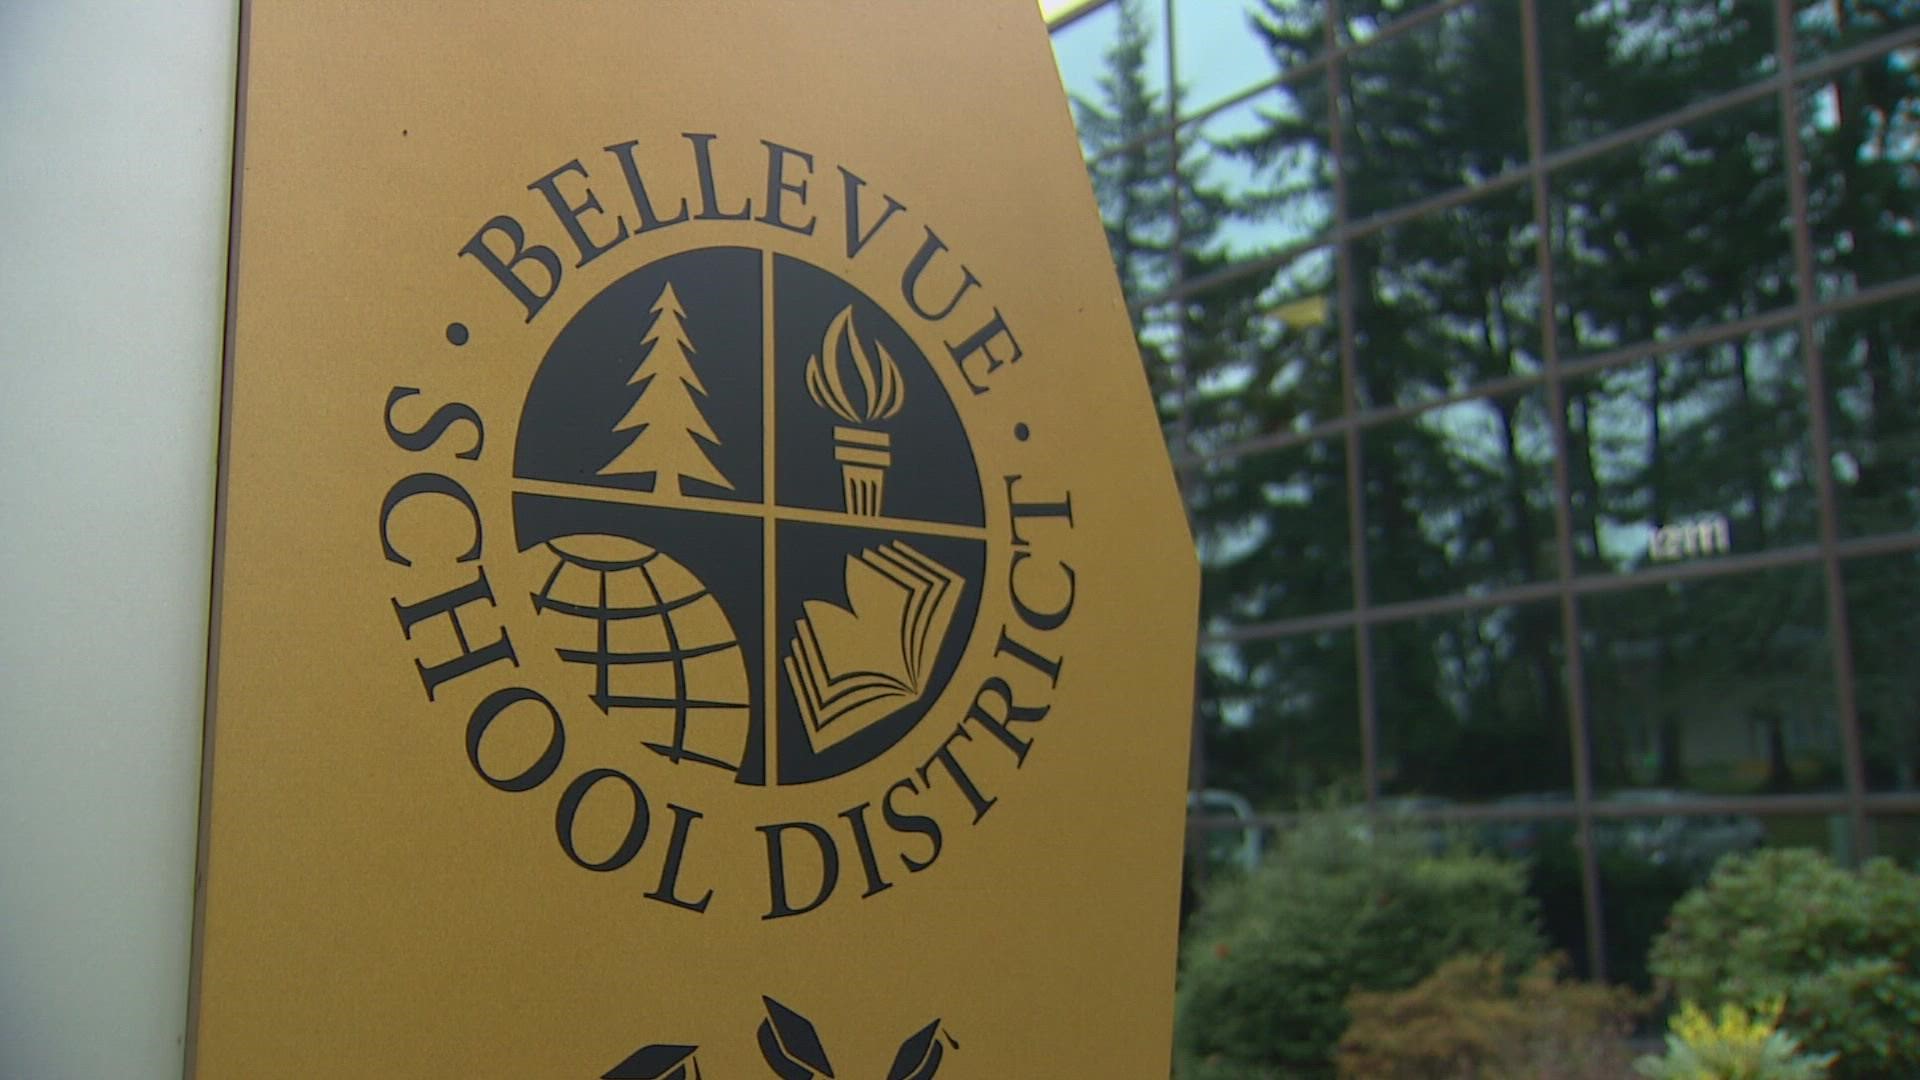 For the past two weeks, authorities and school officials in western Washington have been responding to threats at several schools in the region.